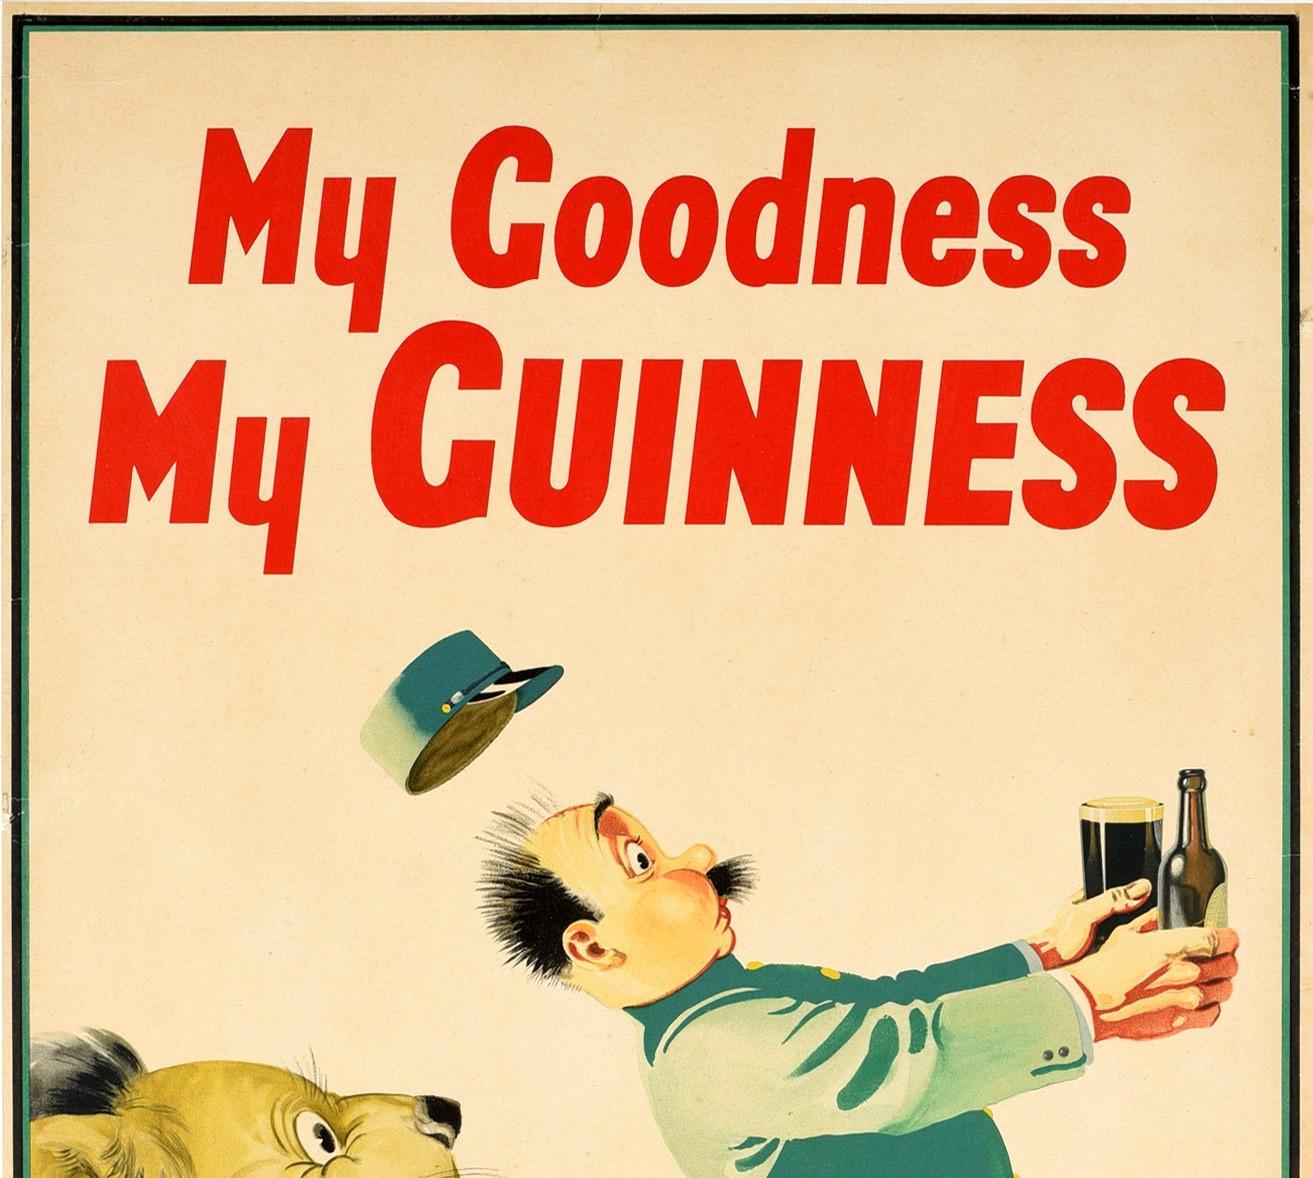 Original vintage advertising poster for the iconic drink Guinness Irish stout beer - My Goodness My Guinness - featuring a colourful and fun image of a zoo keeper holding a full glass and bottle of Guinness with his hat flying off as he runs away